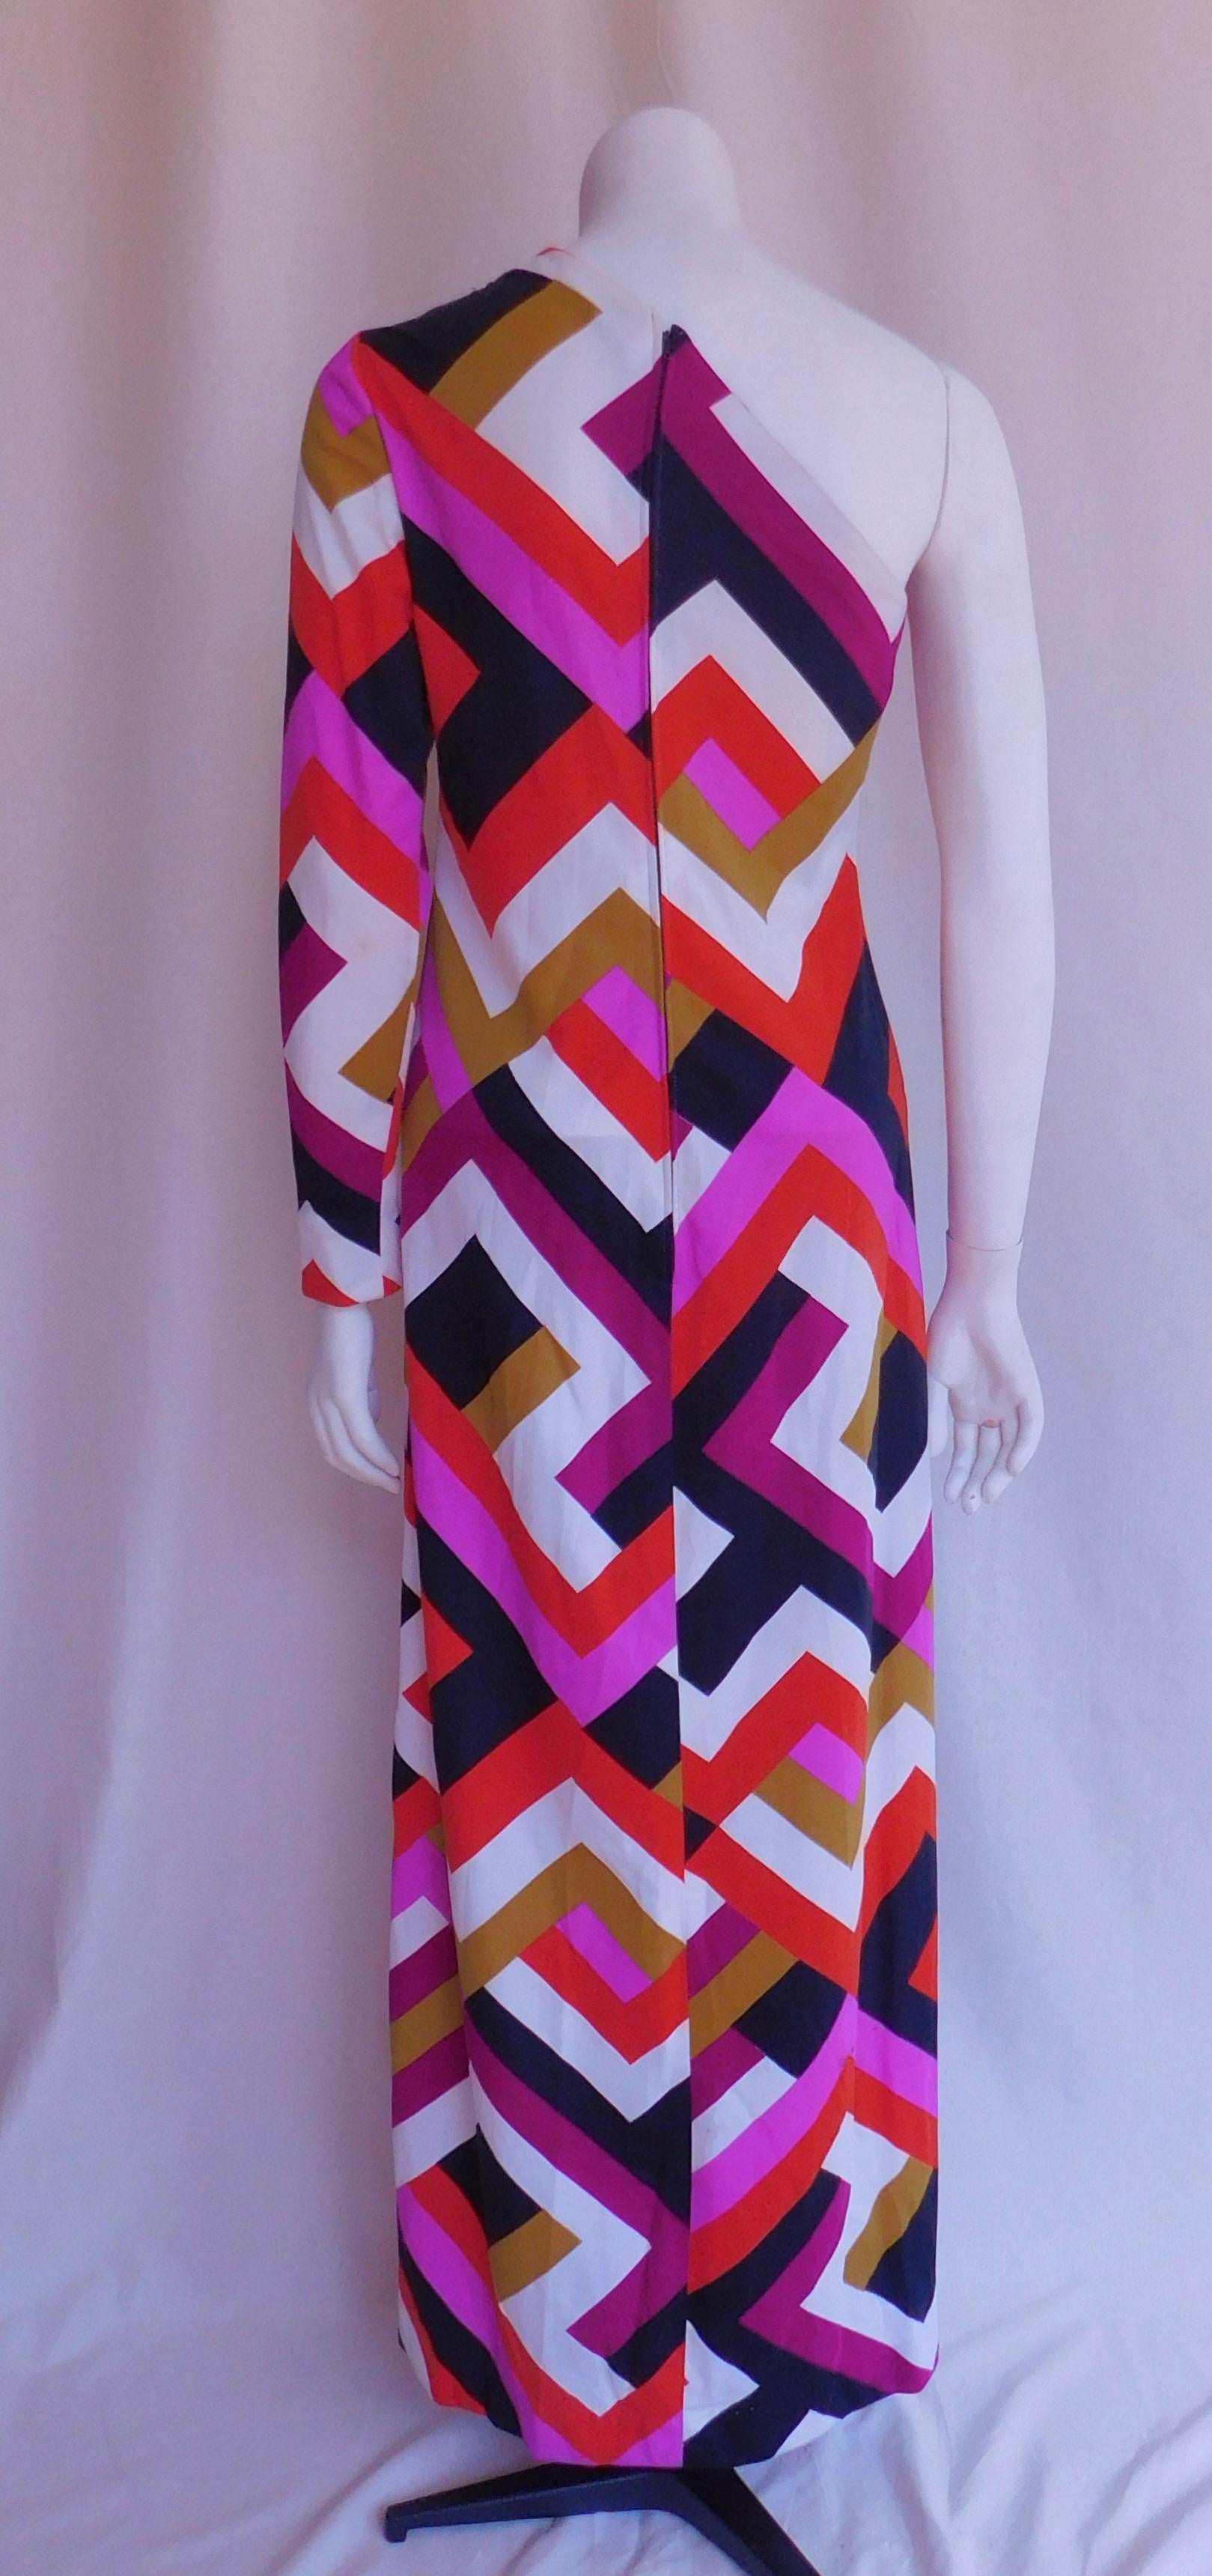 Circa 1980 one sleeve maxi dress by August max . The stretchy nature of the synthetic jersey fabric allow for stretch so it can fit a size 38-42 depending if you want to wear the dress loose (as shown on the mannequin) or form fitting
Shoulder to